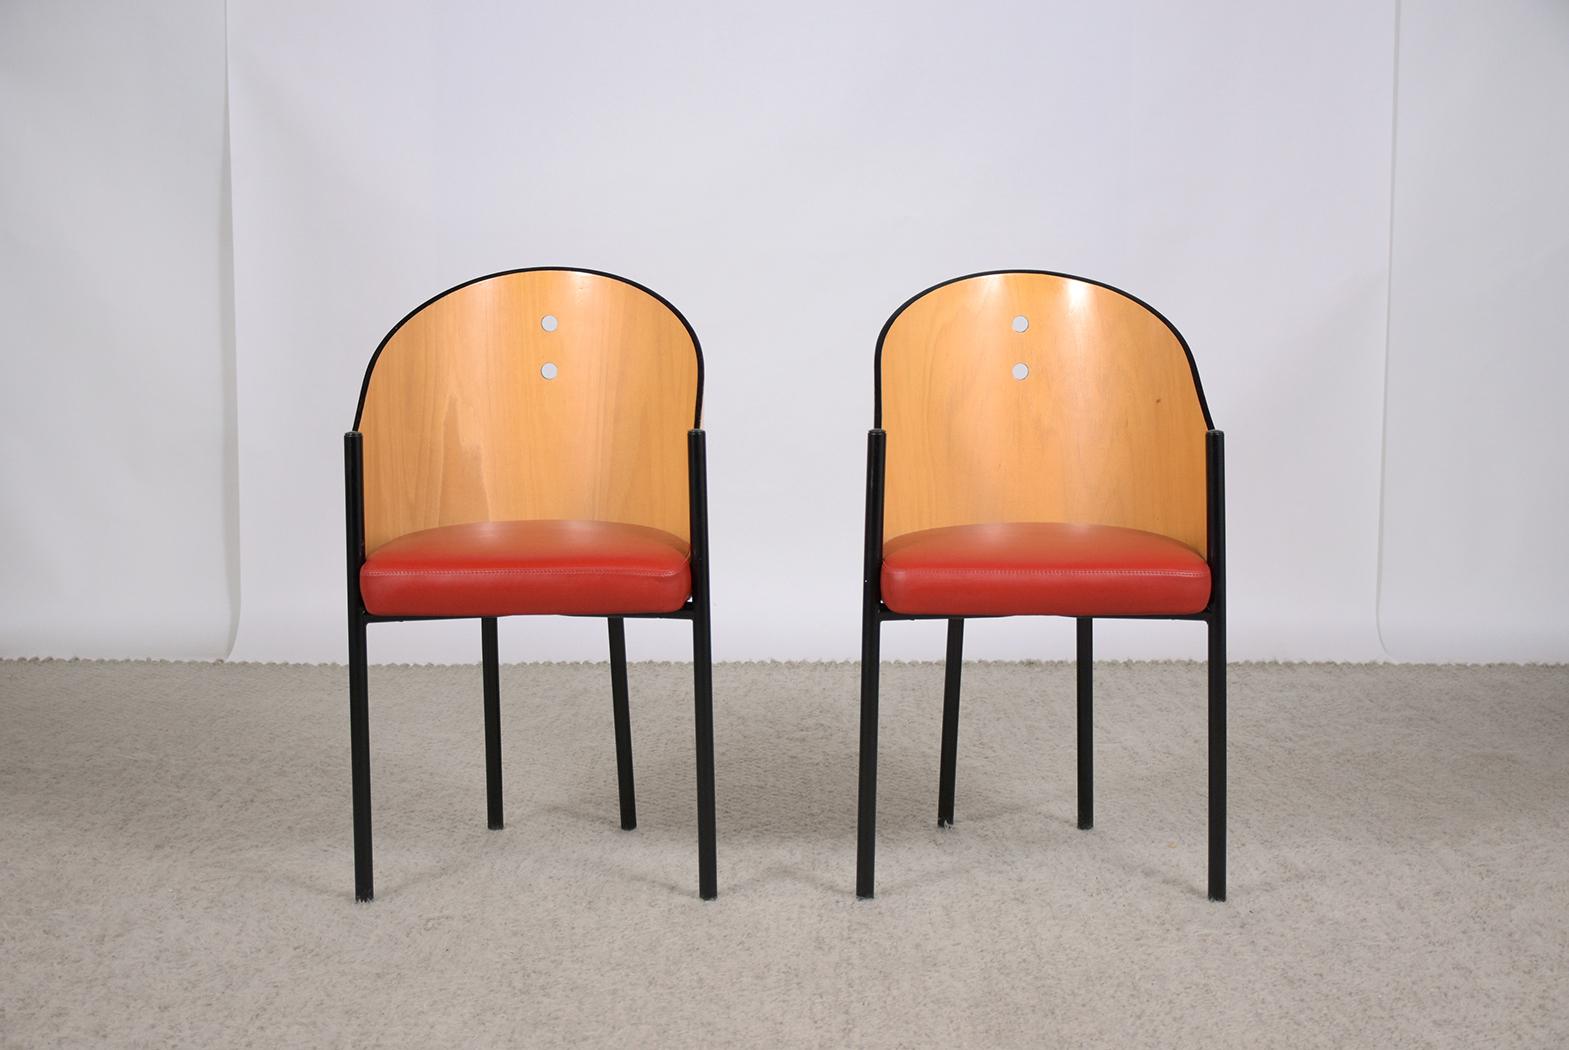 Vintage Mid-Century Dining Chairs: Elegance in Barrel Back Design In Good Condition For Sale In Los Angeles, CA